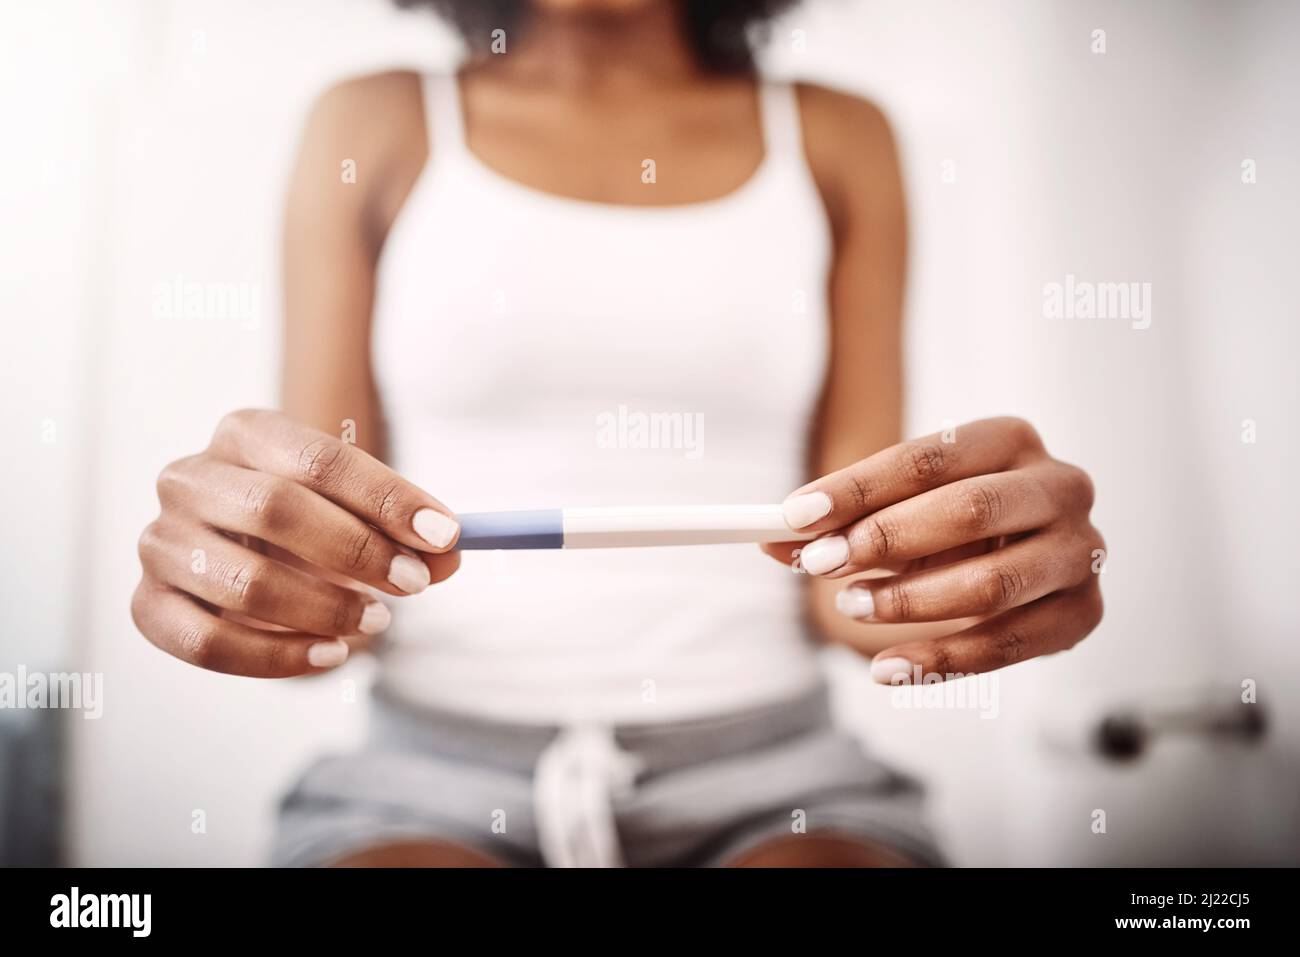 Is it too early to start coming up with names. Shot of an unrecognizable woman holding a pregnancy test stick while sitting on the toilet. Stock Photo